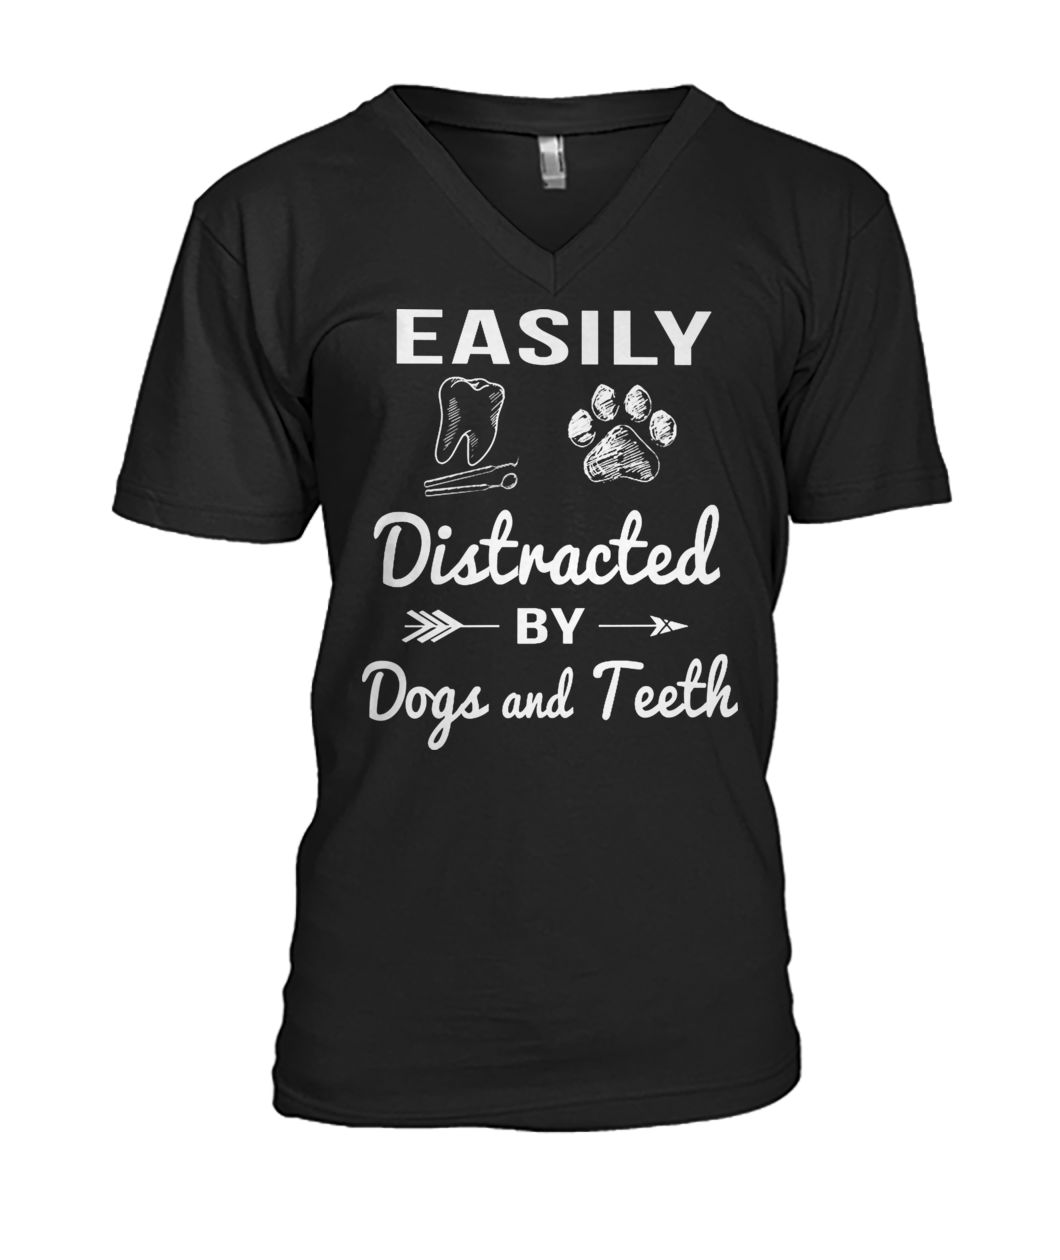 Easily distracted by dogs and teeth mens v-neck